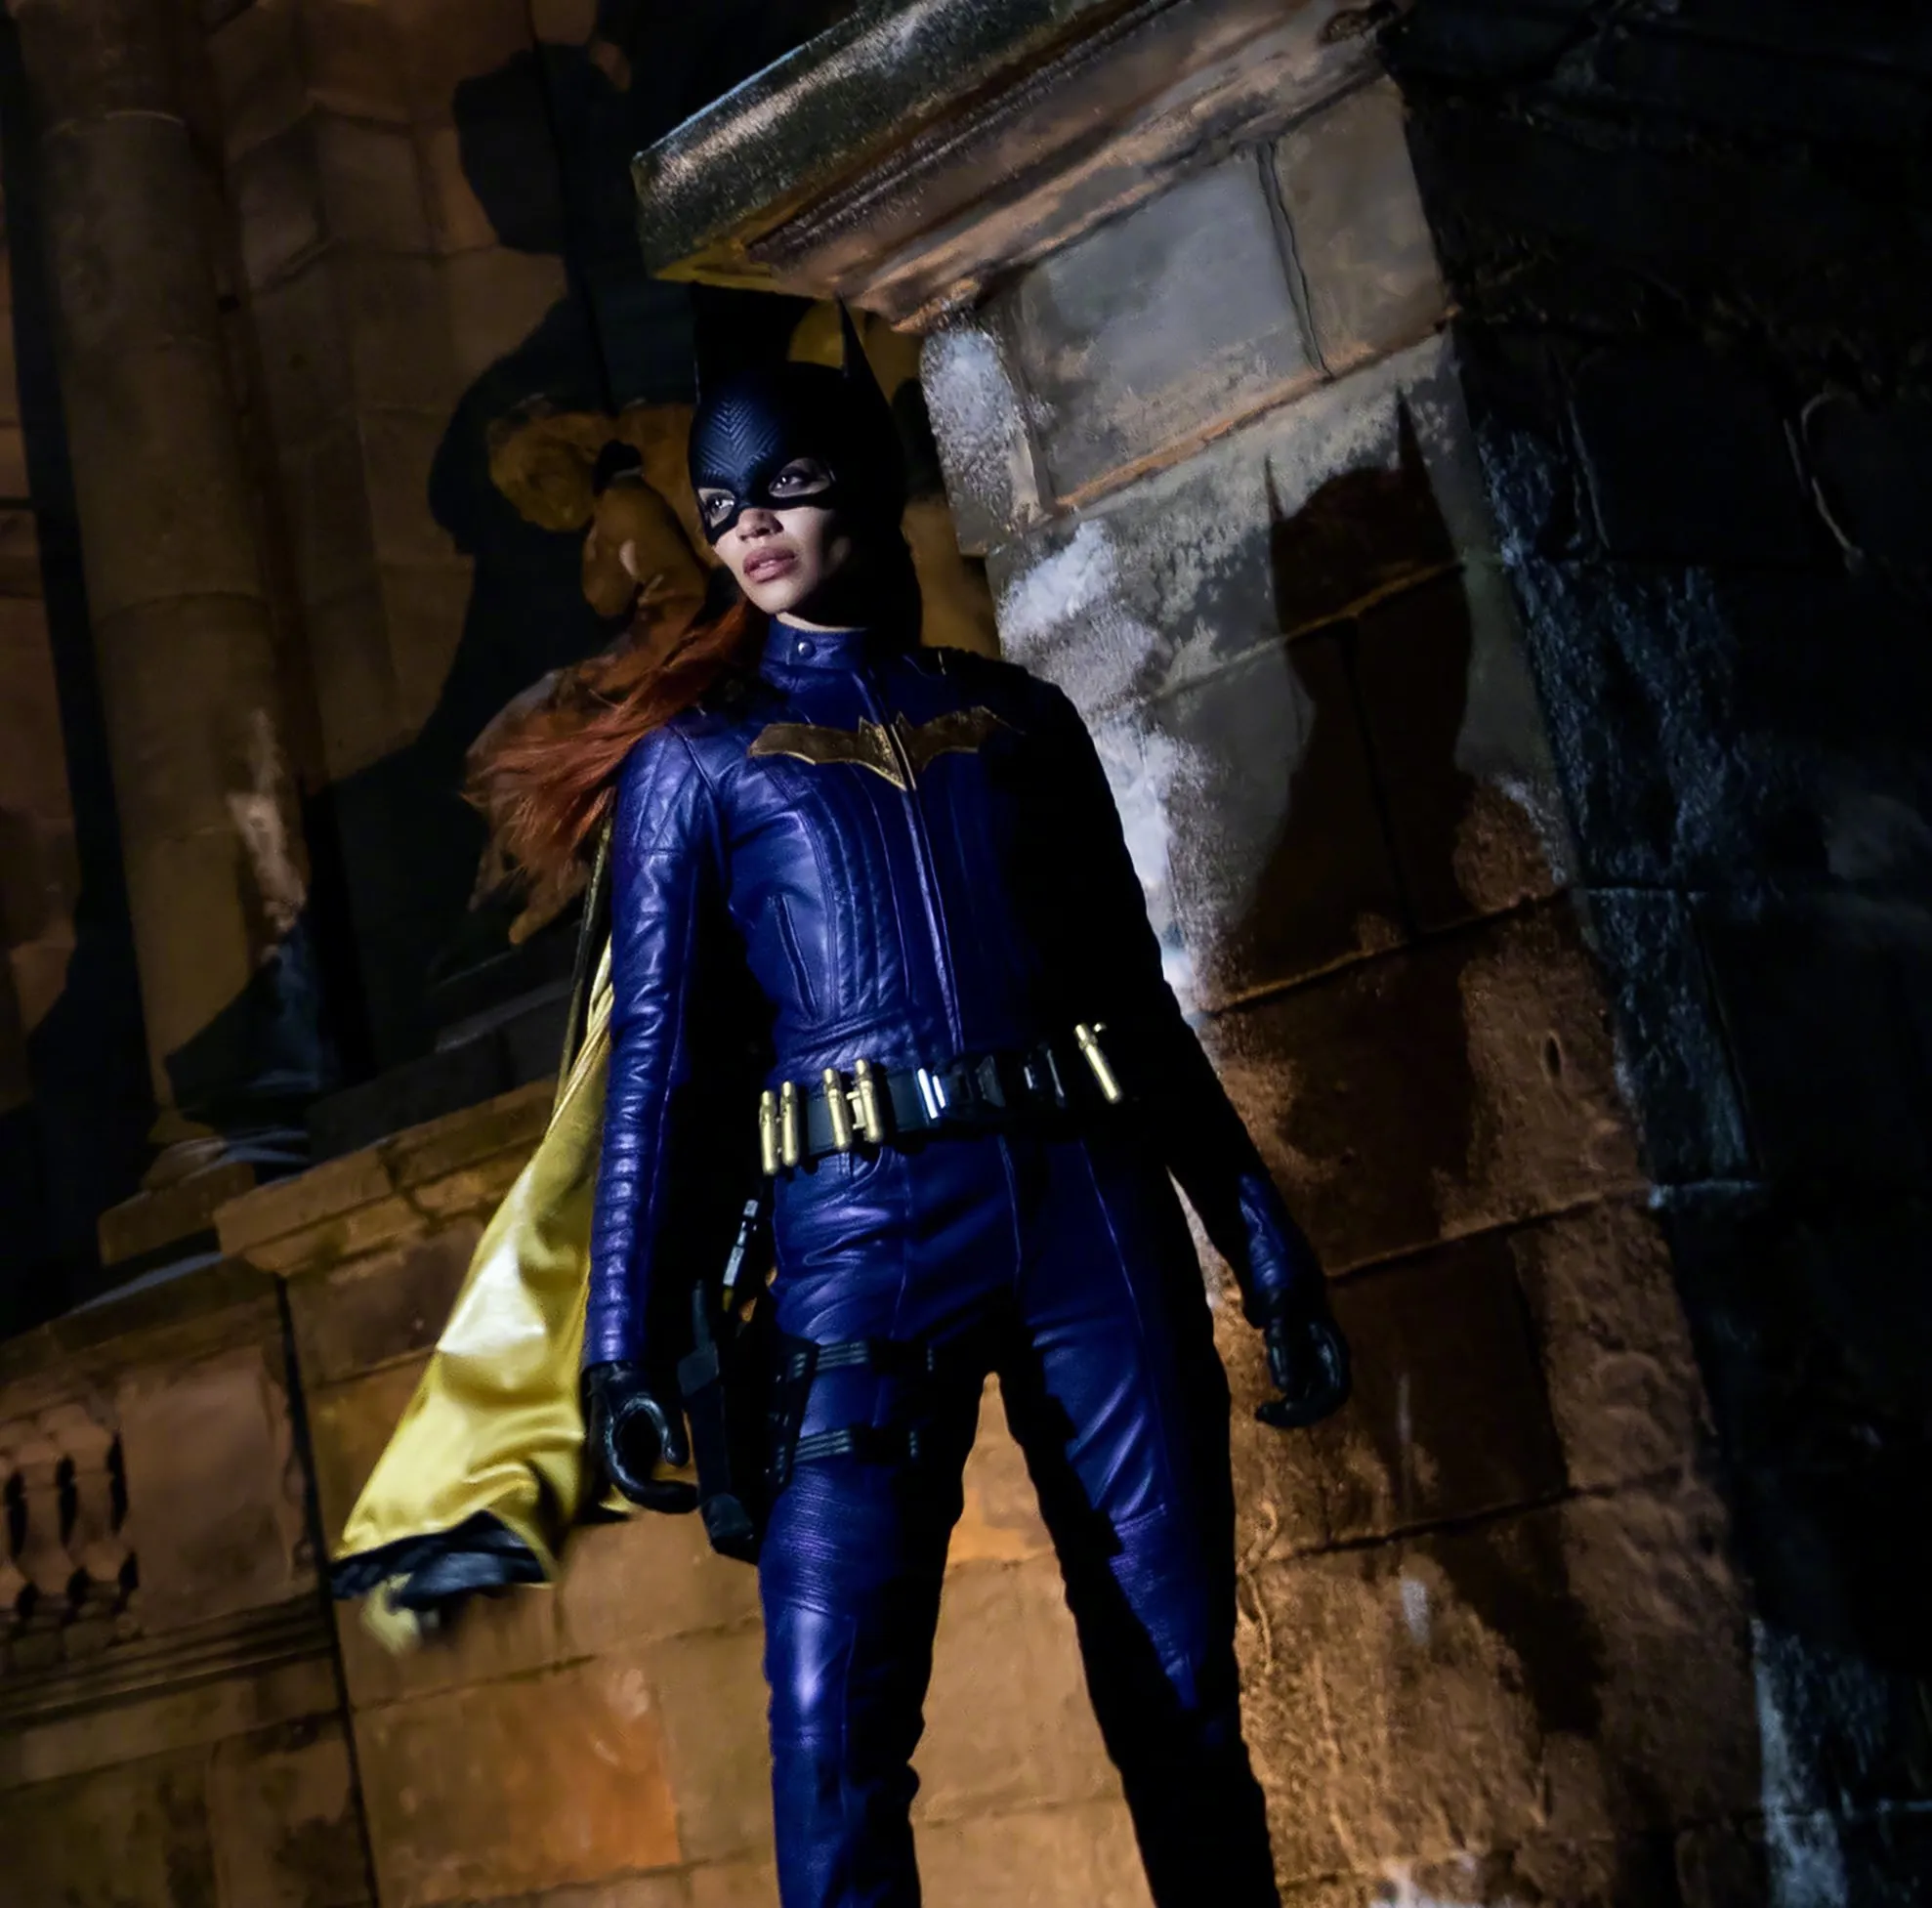 Why did Warner cut off "Batgirl" that had invested $90 million? | FMV6